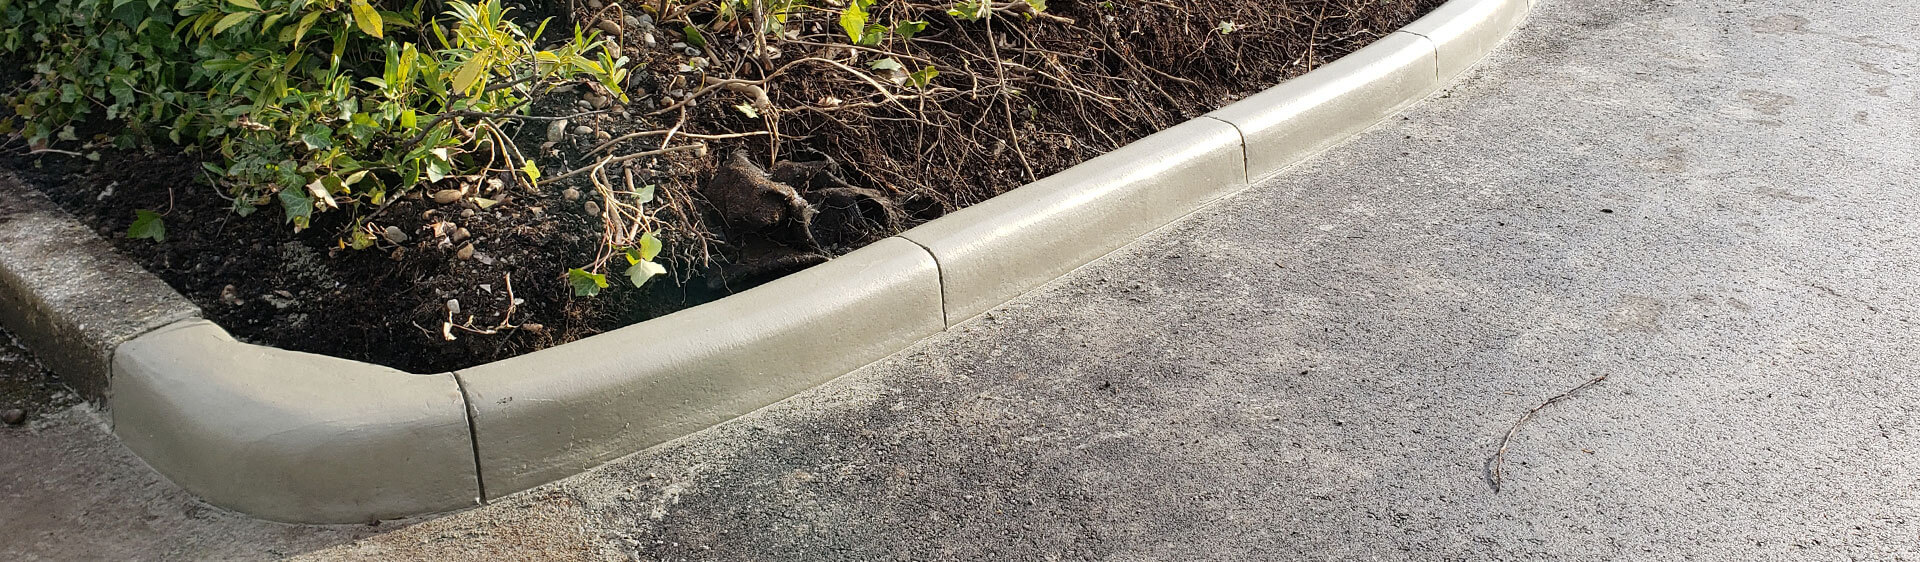 Fraser Valley Concrete Curbing, Garden Edging and Curb Repairs